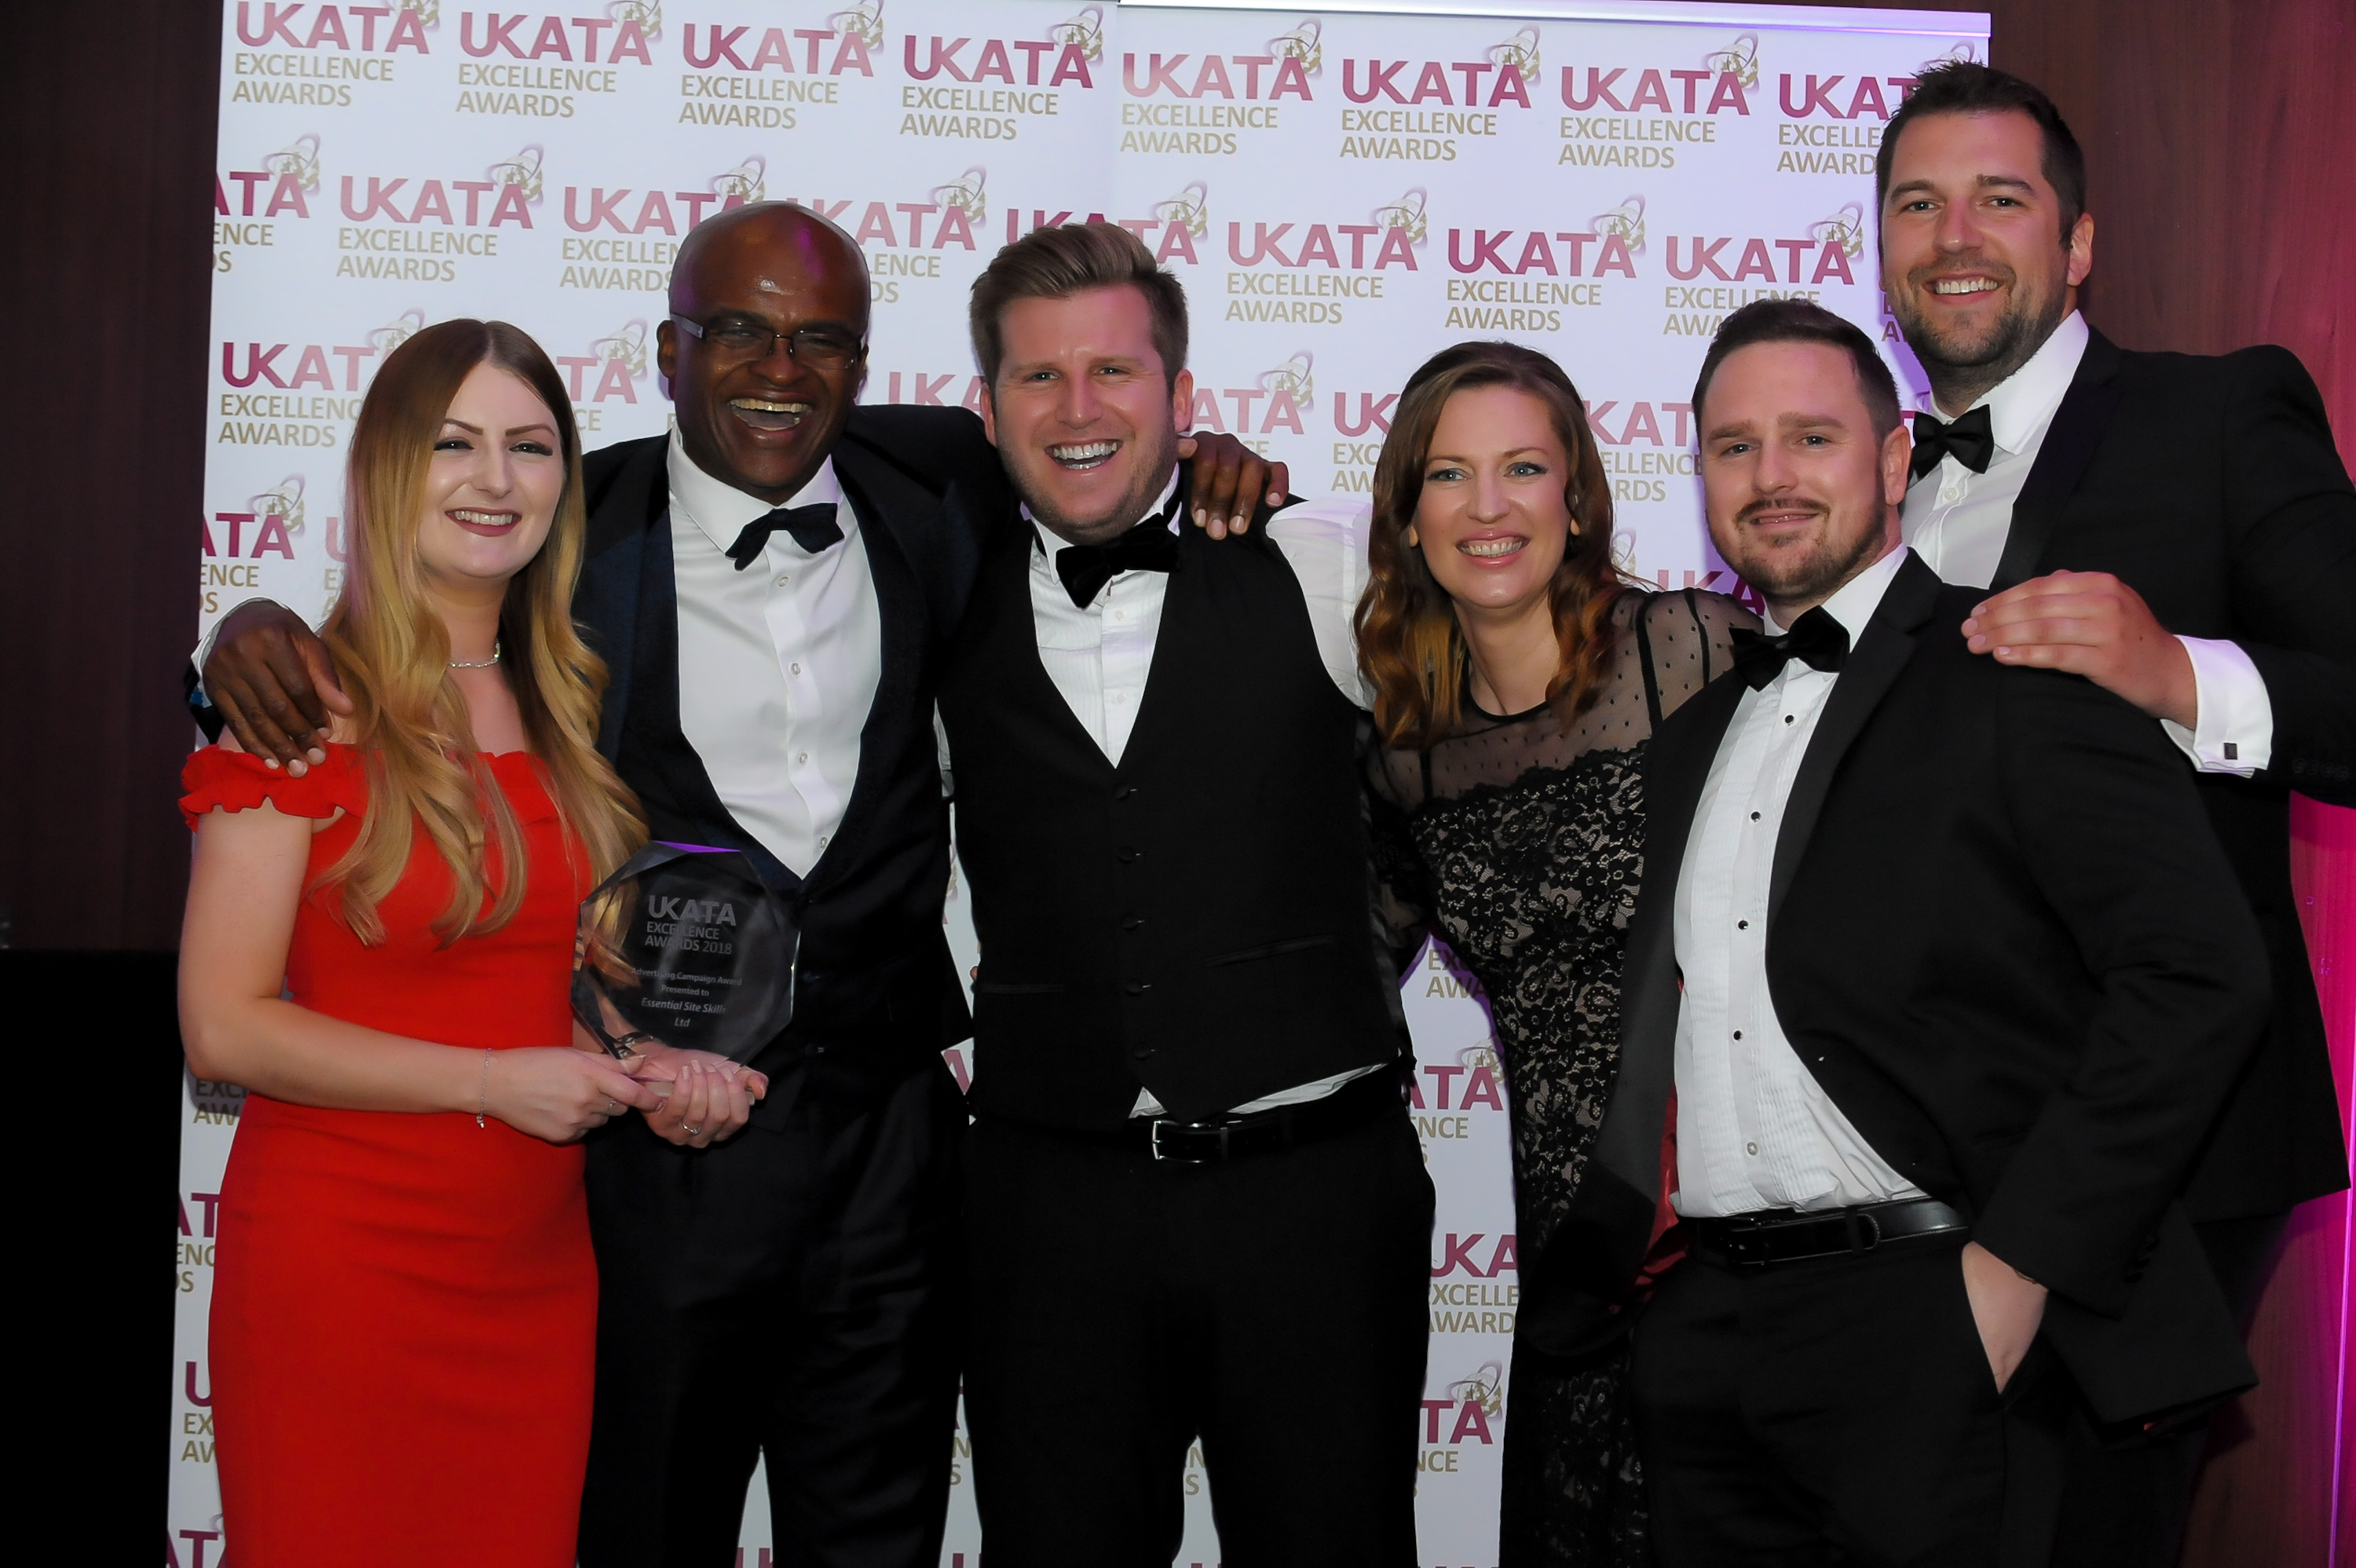 Image shows group of ESS workers at UKATA Awards.